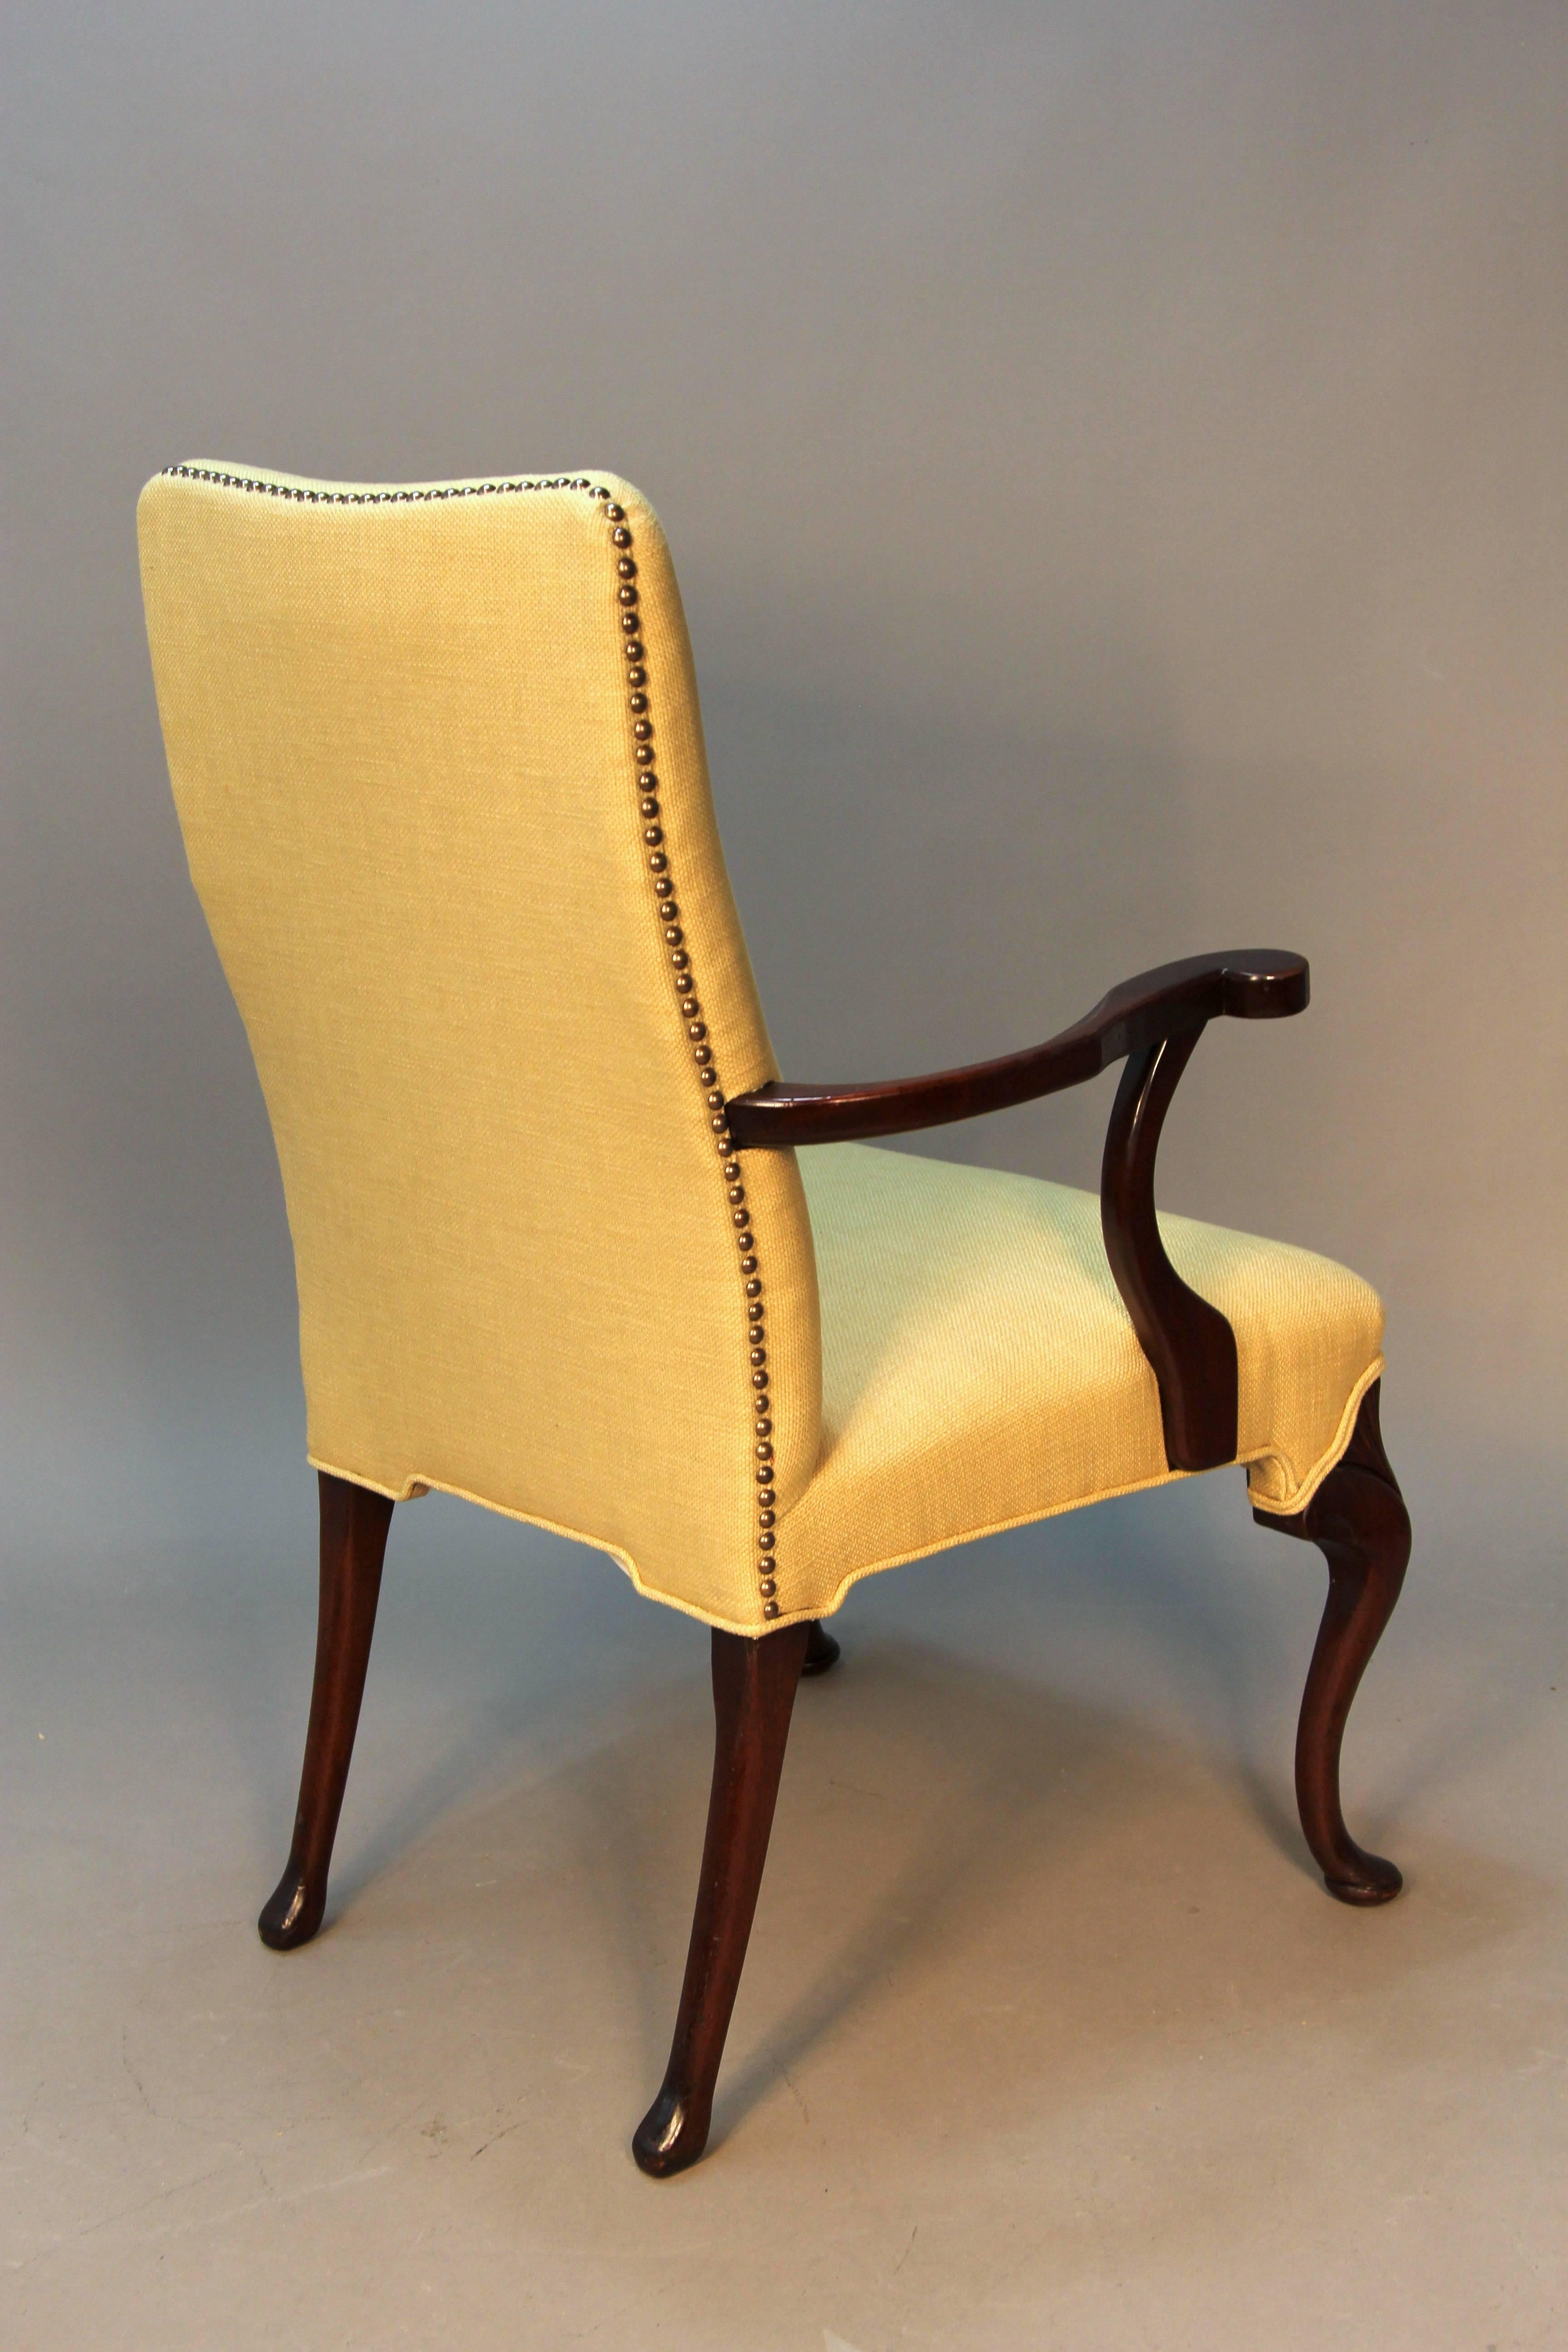 Six Hickory & Co. Armchairs Dining/Conference/Library In Excellent Condition For Sale In Bridport, CT